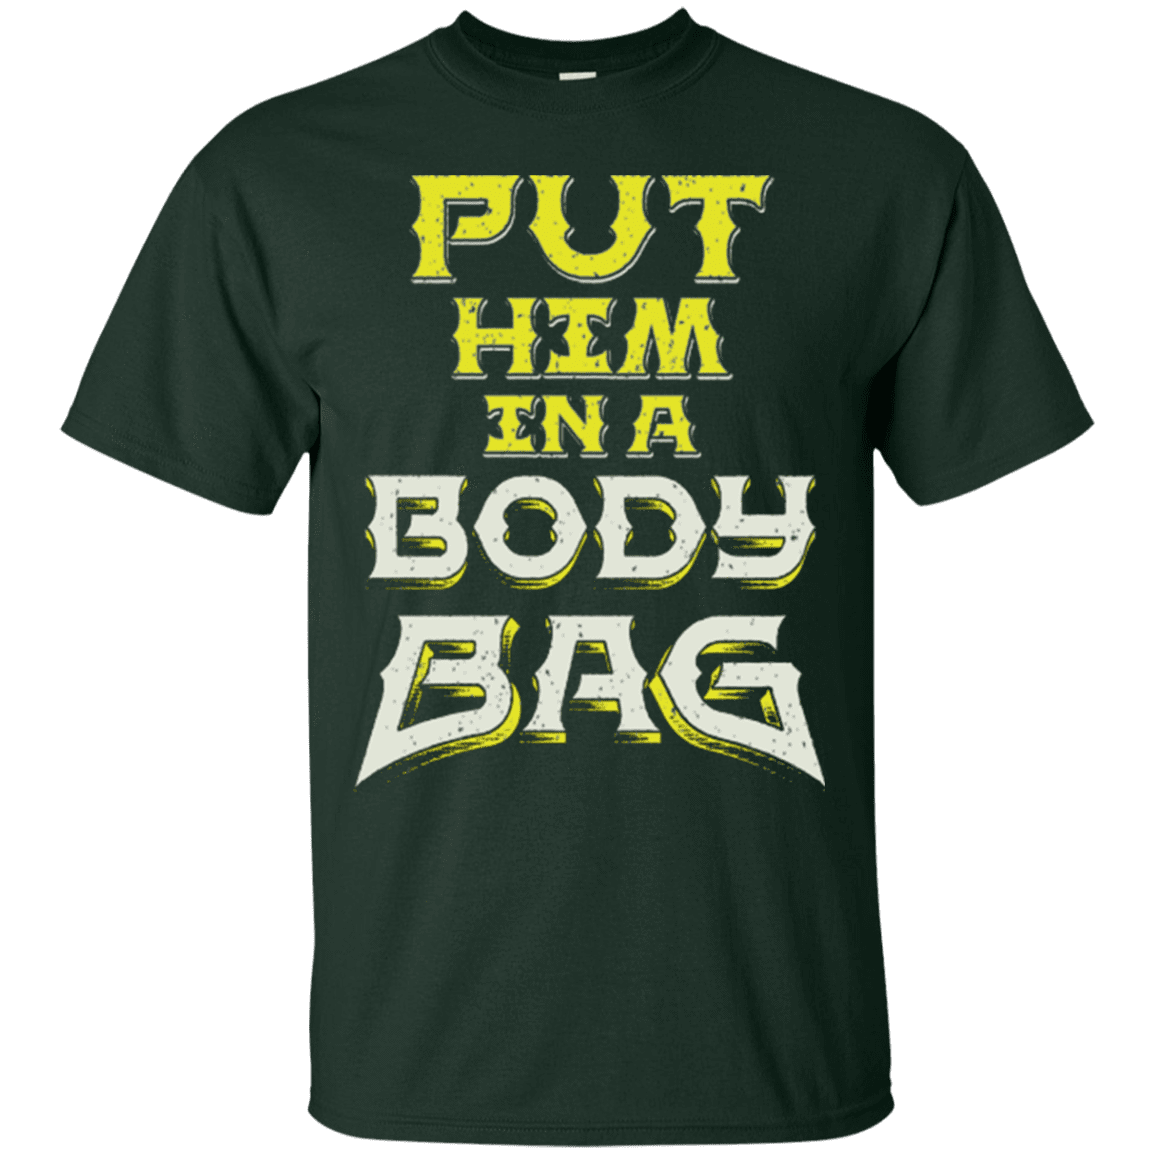 T-Shirts Forest / S BODY BAG T-Shirt